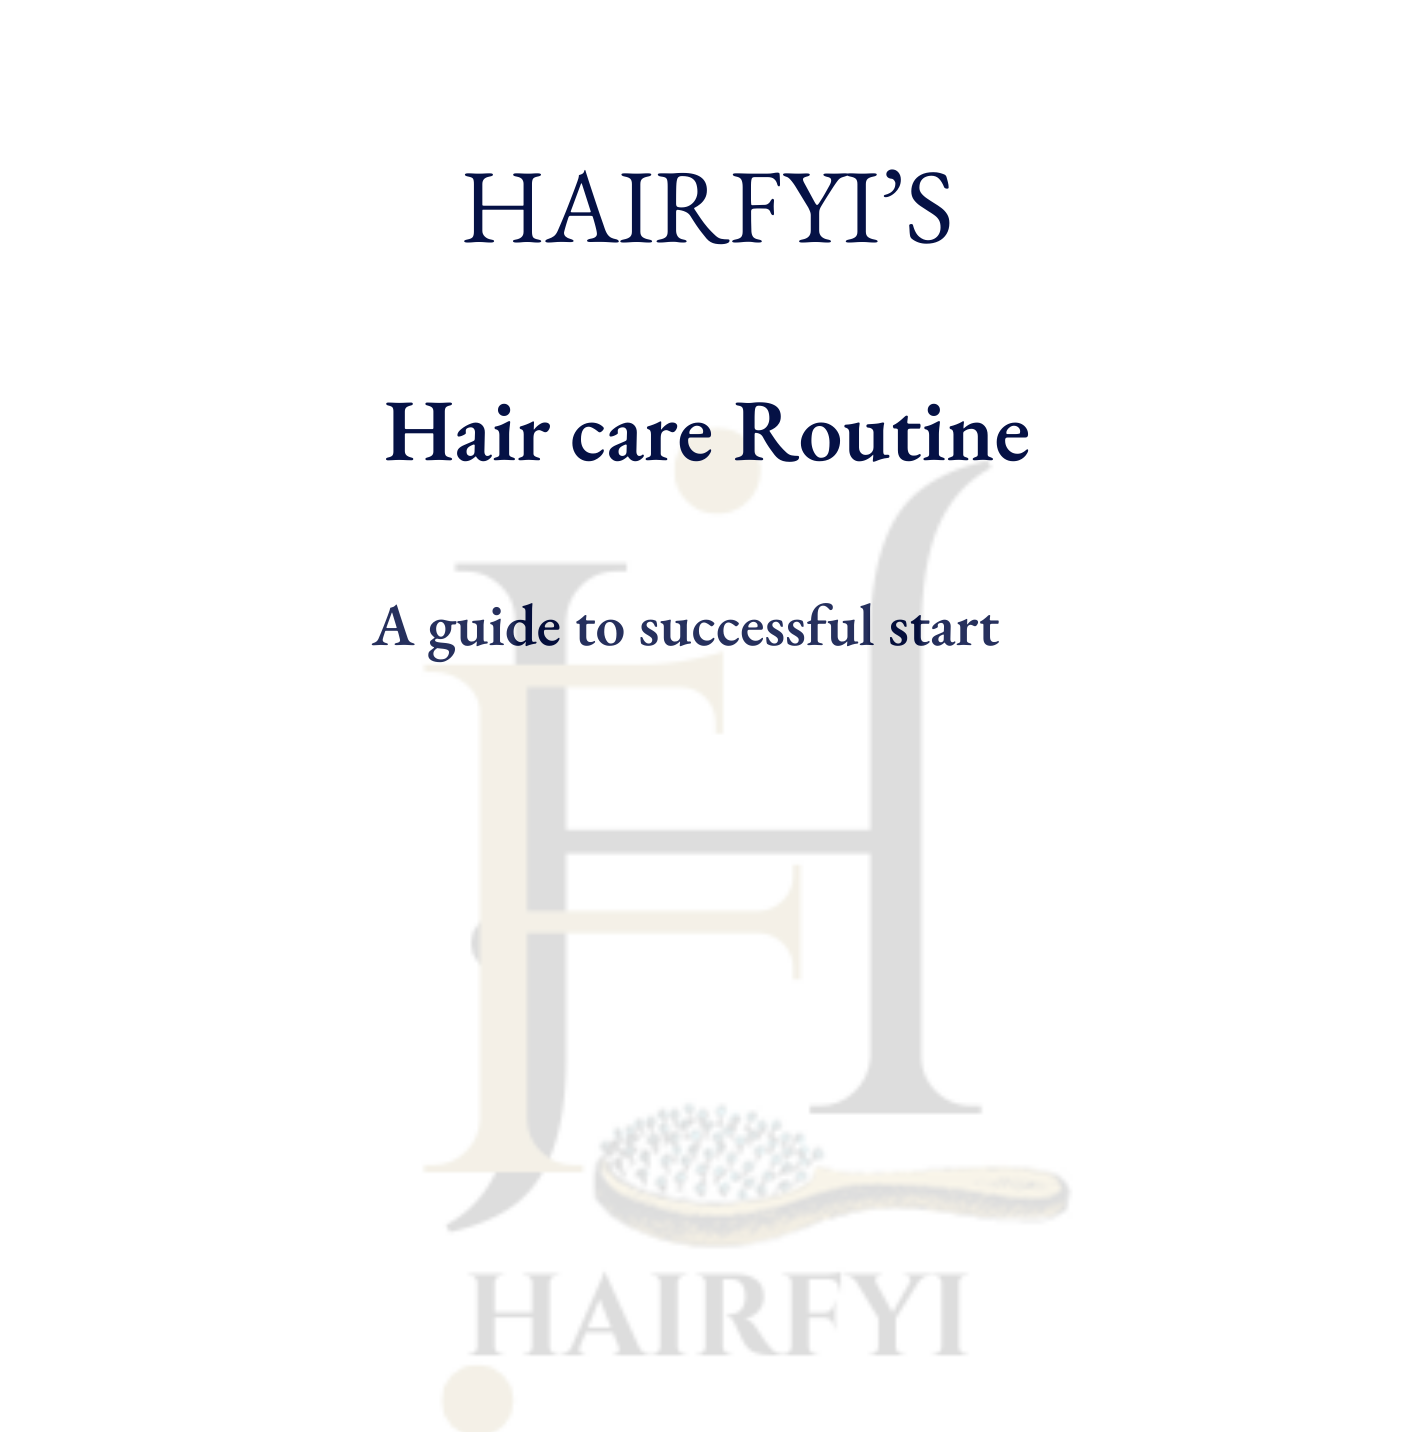 Hairfyi complete free guide